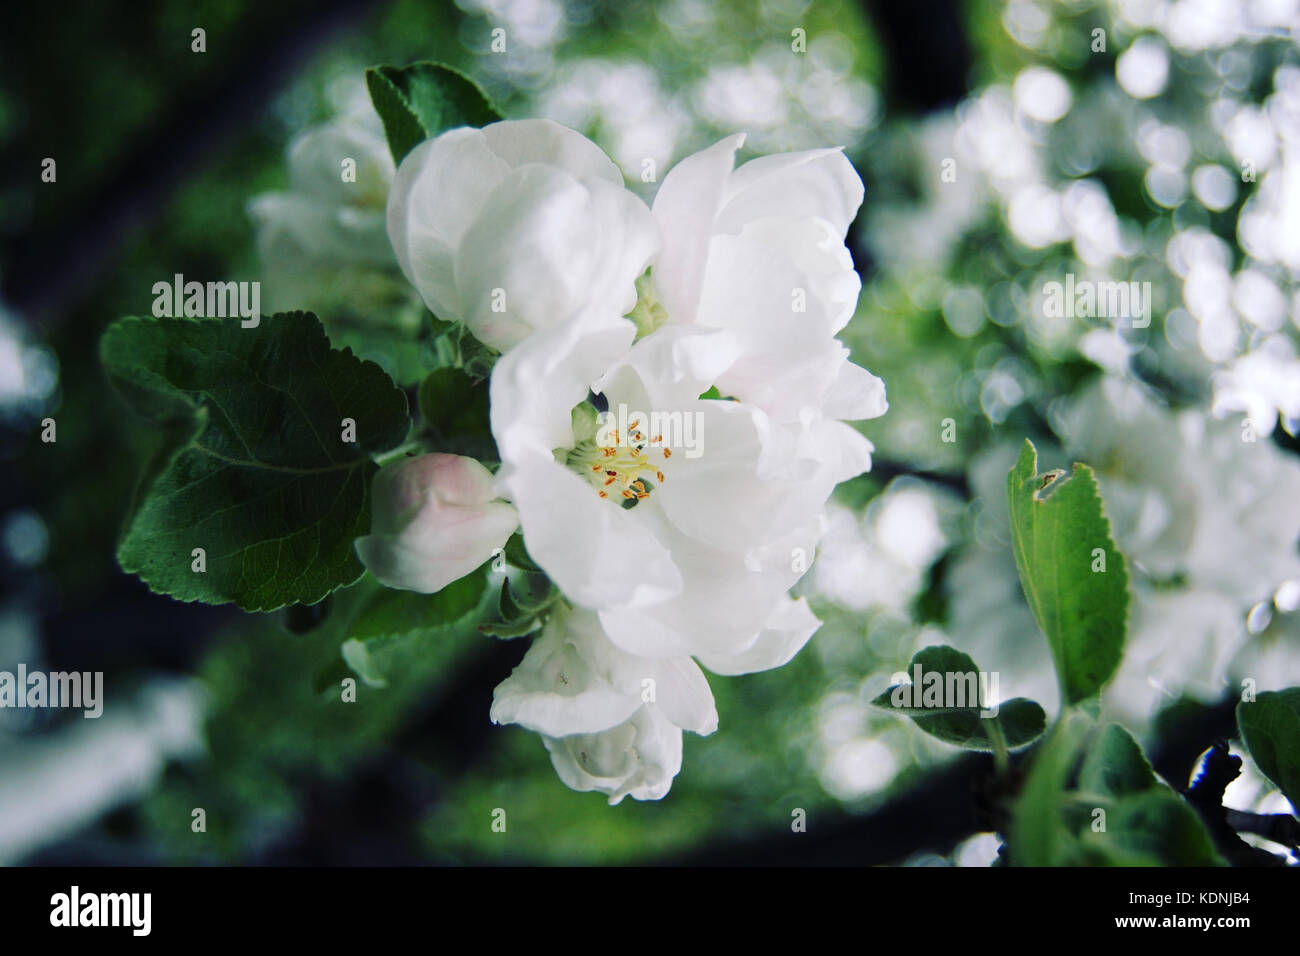 Apple flowers in bloom. Aged photo. Flowers bloom in spring season. Apple Blossom Time. Blossoming apple flowers in spring. Retro filter photo. Blosso Stock Photo